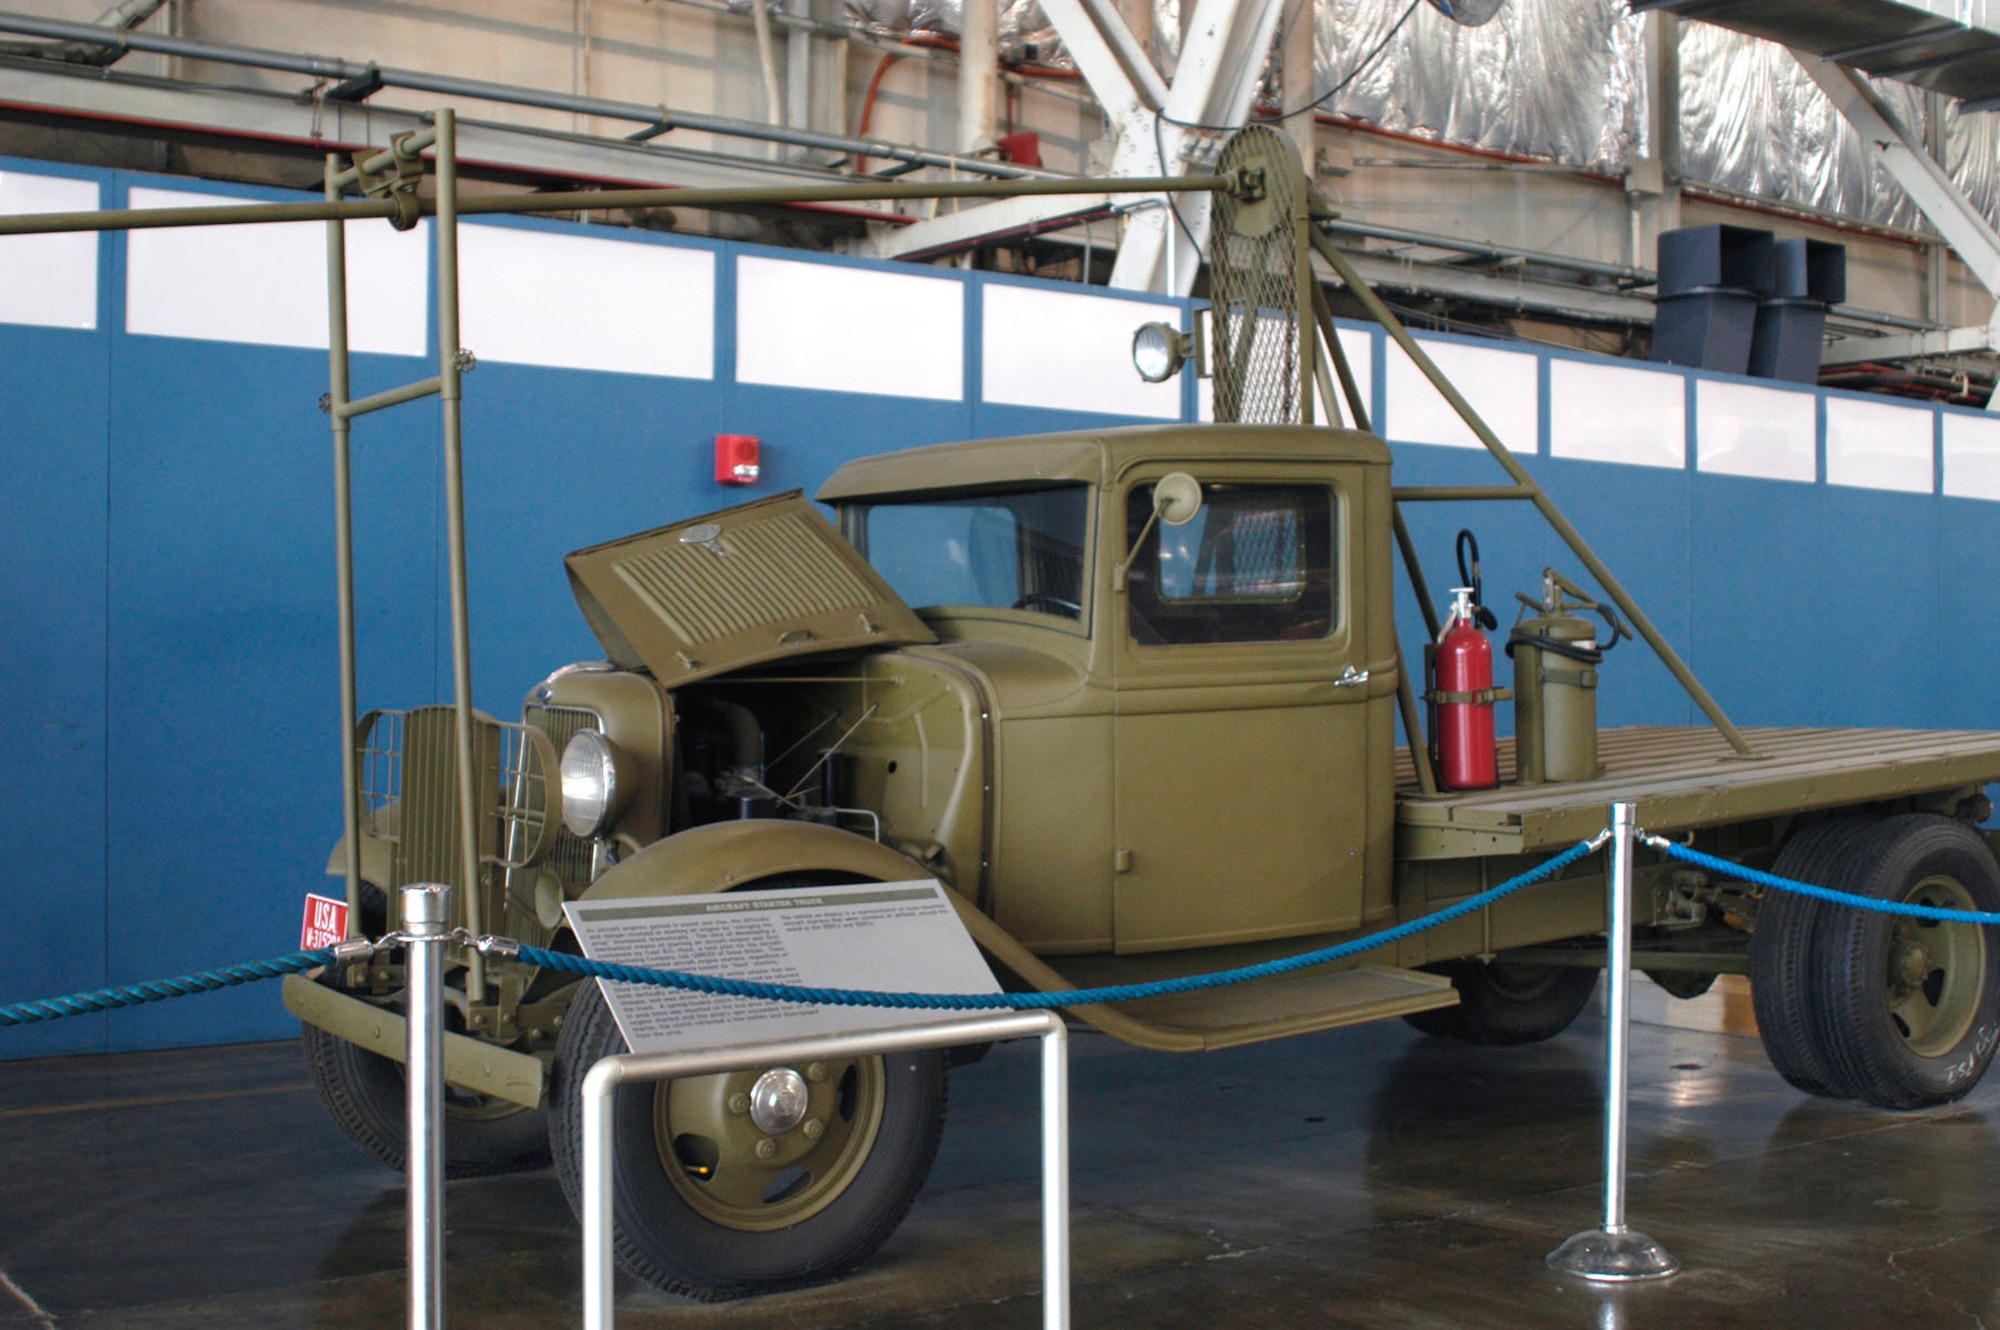 DAYTON, Ohio -- Aircraft Starter Truck on display in the Presidential Gallery at the National Museum of the United States Air Force. (U.S. Air Force photo)